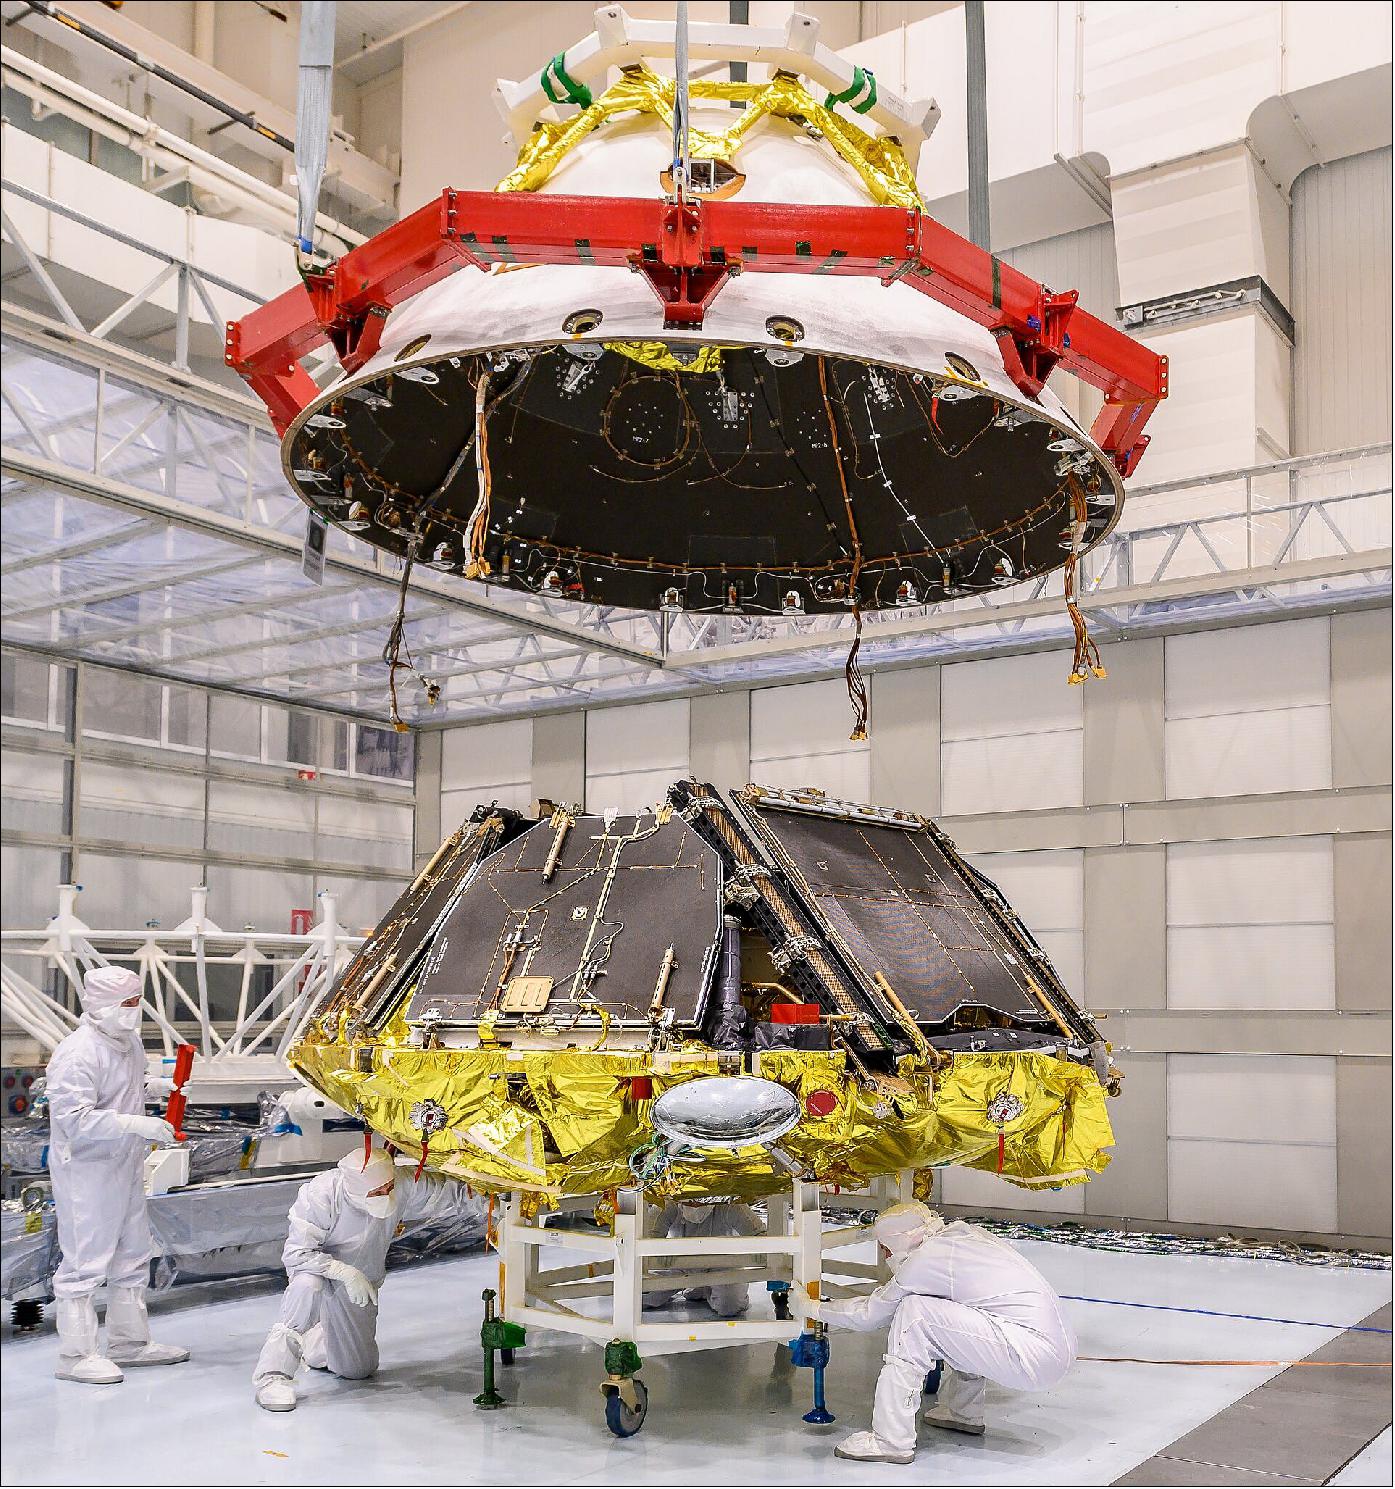 Figure 40: The Kazachok landing platform of the ExoMars mission is revealed as the descent module rear jacket is lifted above. The platforms ramps and solar panels are seen in folded configuration. Kazachok currently sits on a supporting trolley where eventually the front shield will be fitted. The platform and Rosalind Franklin rover will undergo joint testing at the Thales Alenia Space facility in Cannes, France, in the coming weeks (image credit: Thales Alenia Space)